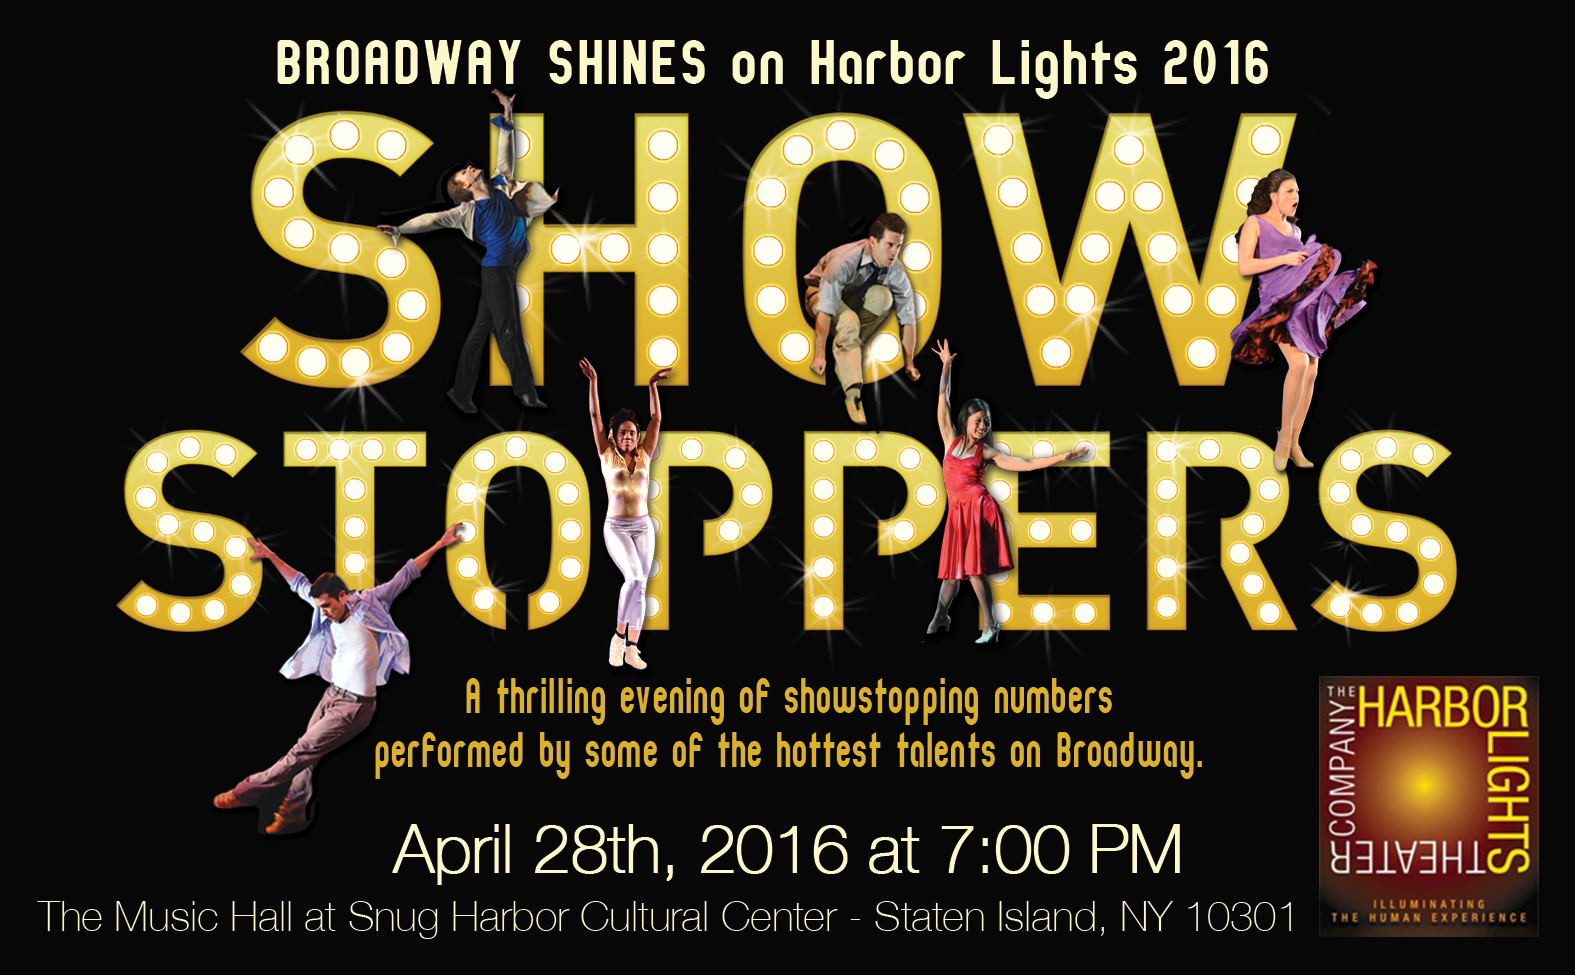 Harbor Lights’ successful ‘Broadway Shines’ event is back April 28th at Snug Harbor’s Music Hall